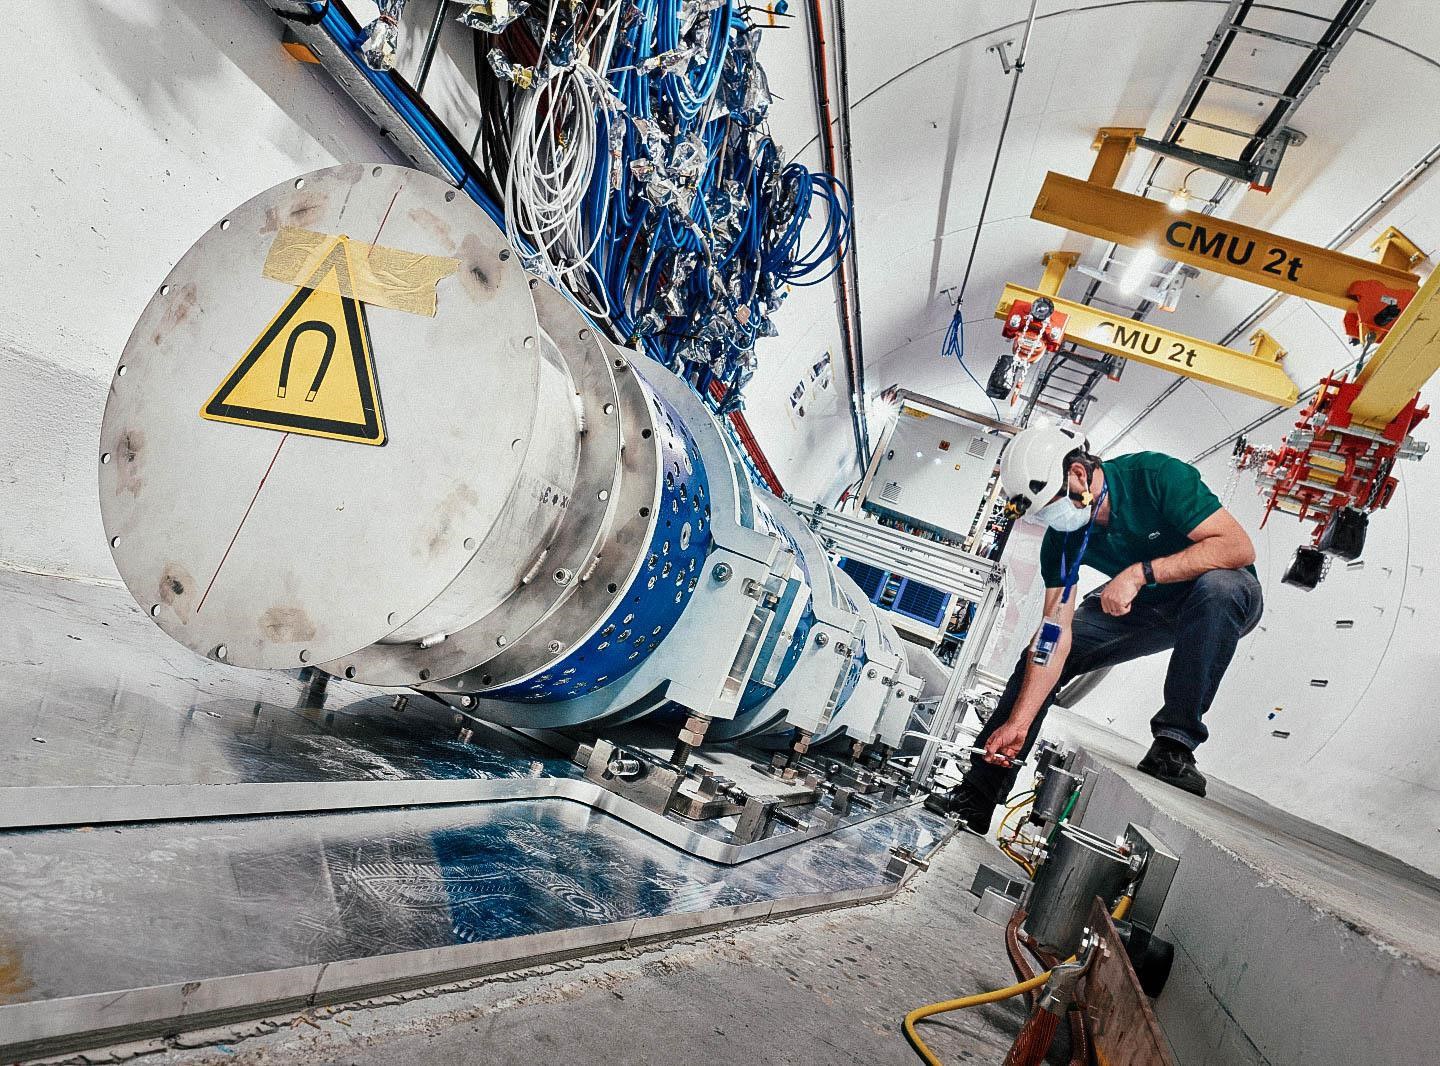 FASER Particle detector - The FASER particle detector located deep underground at CERN's Large Hadron Collider (LHC).